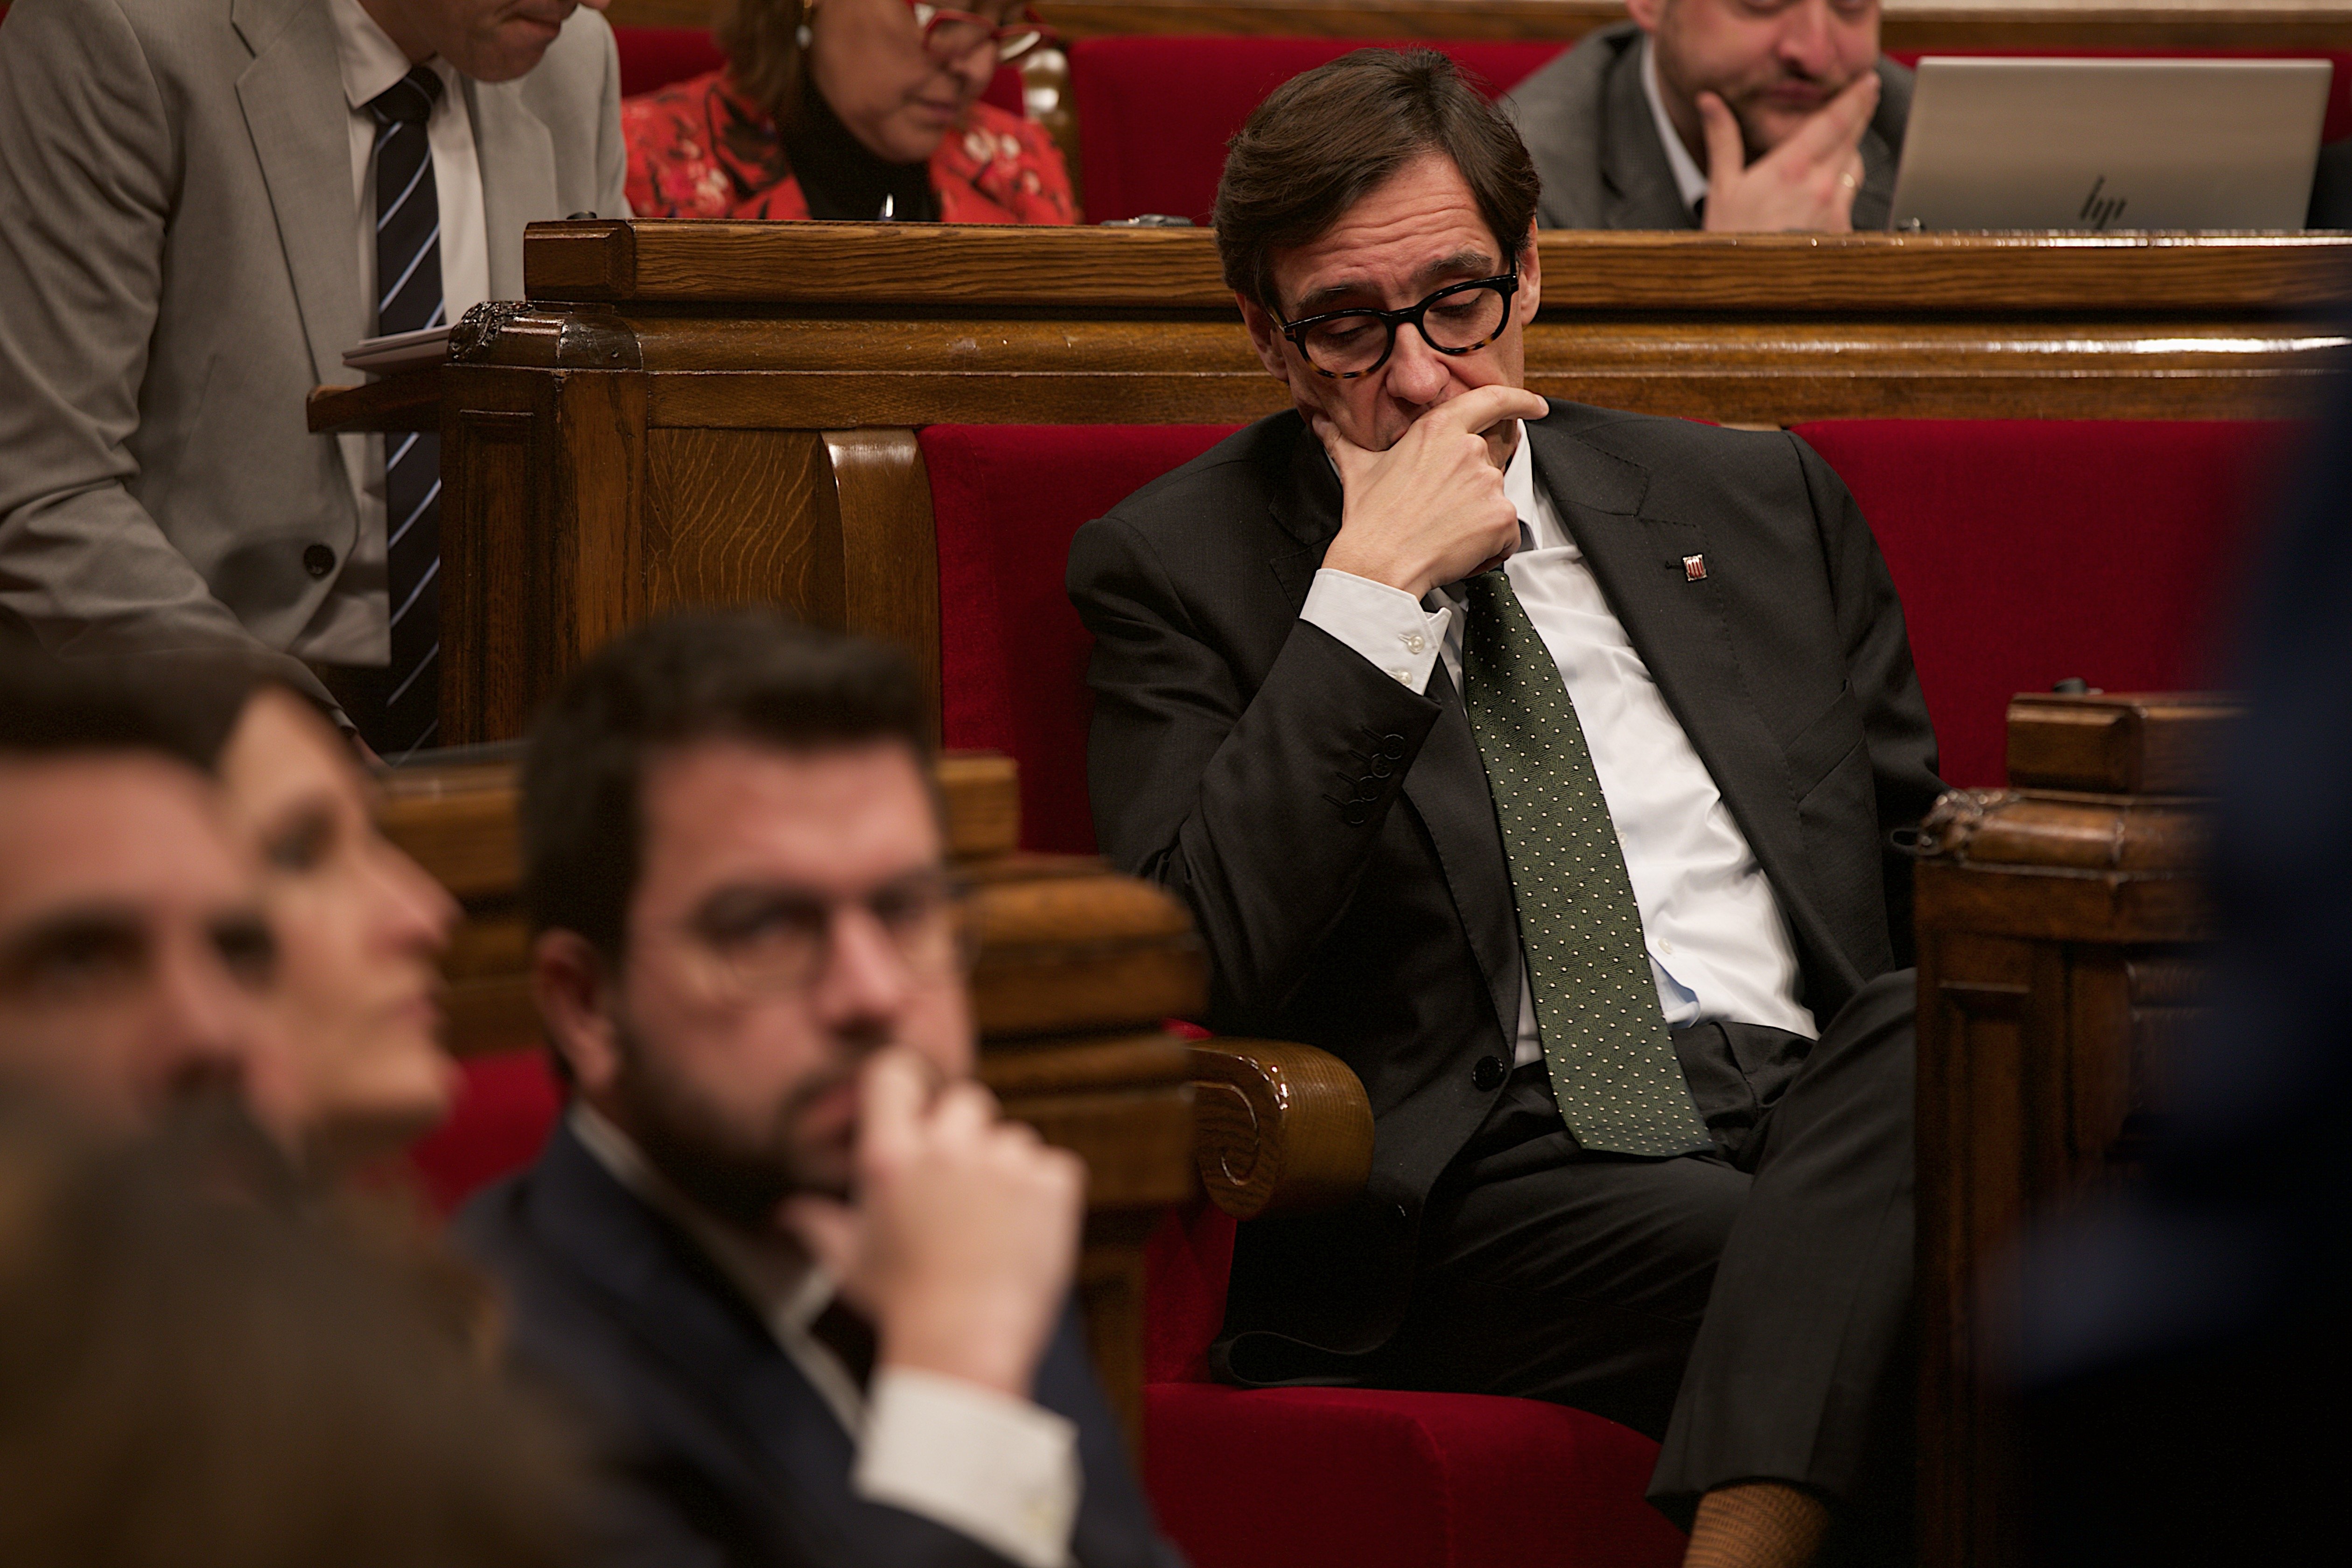 Pere Aragonès gives way to PSC over B-40 highway in bid to pass the Catalan budget